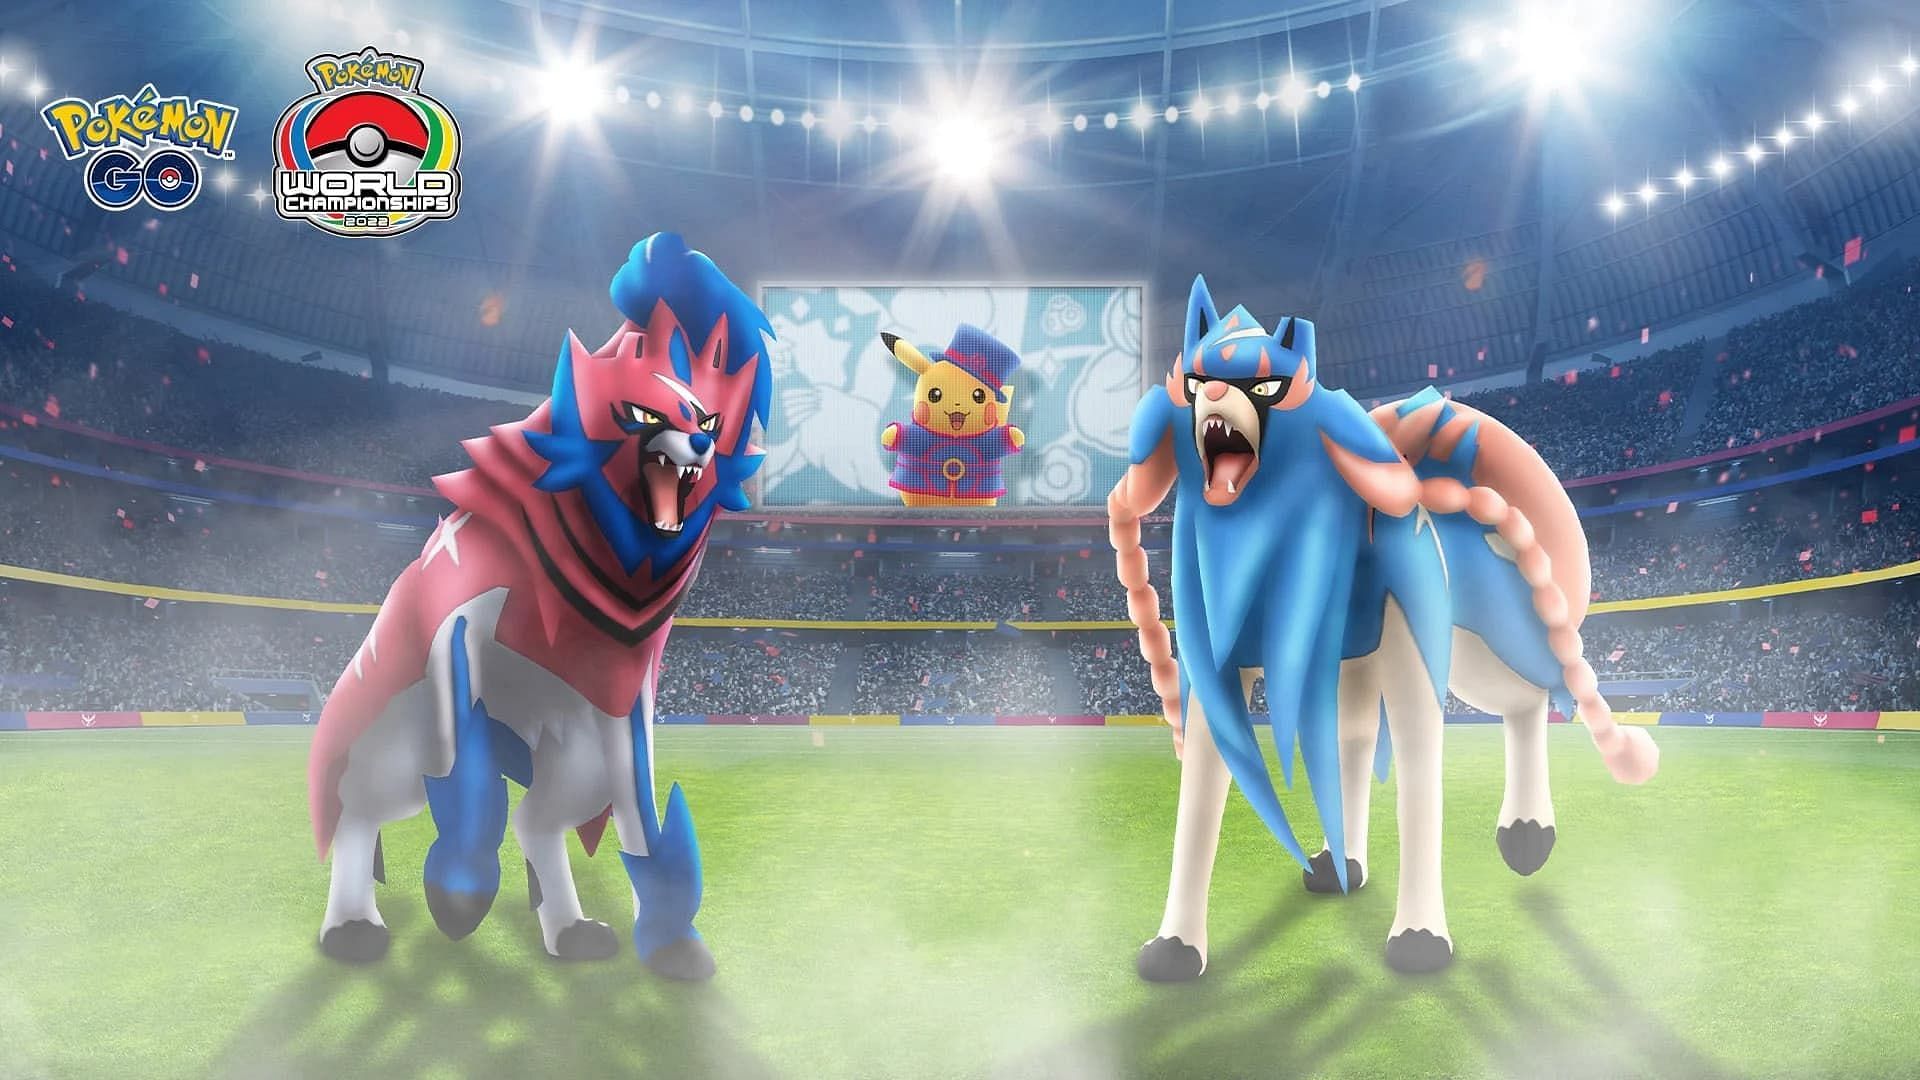 The Pokemon World Championships event has many challenges for Pokemon GO players (Image via Niantic)